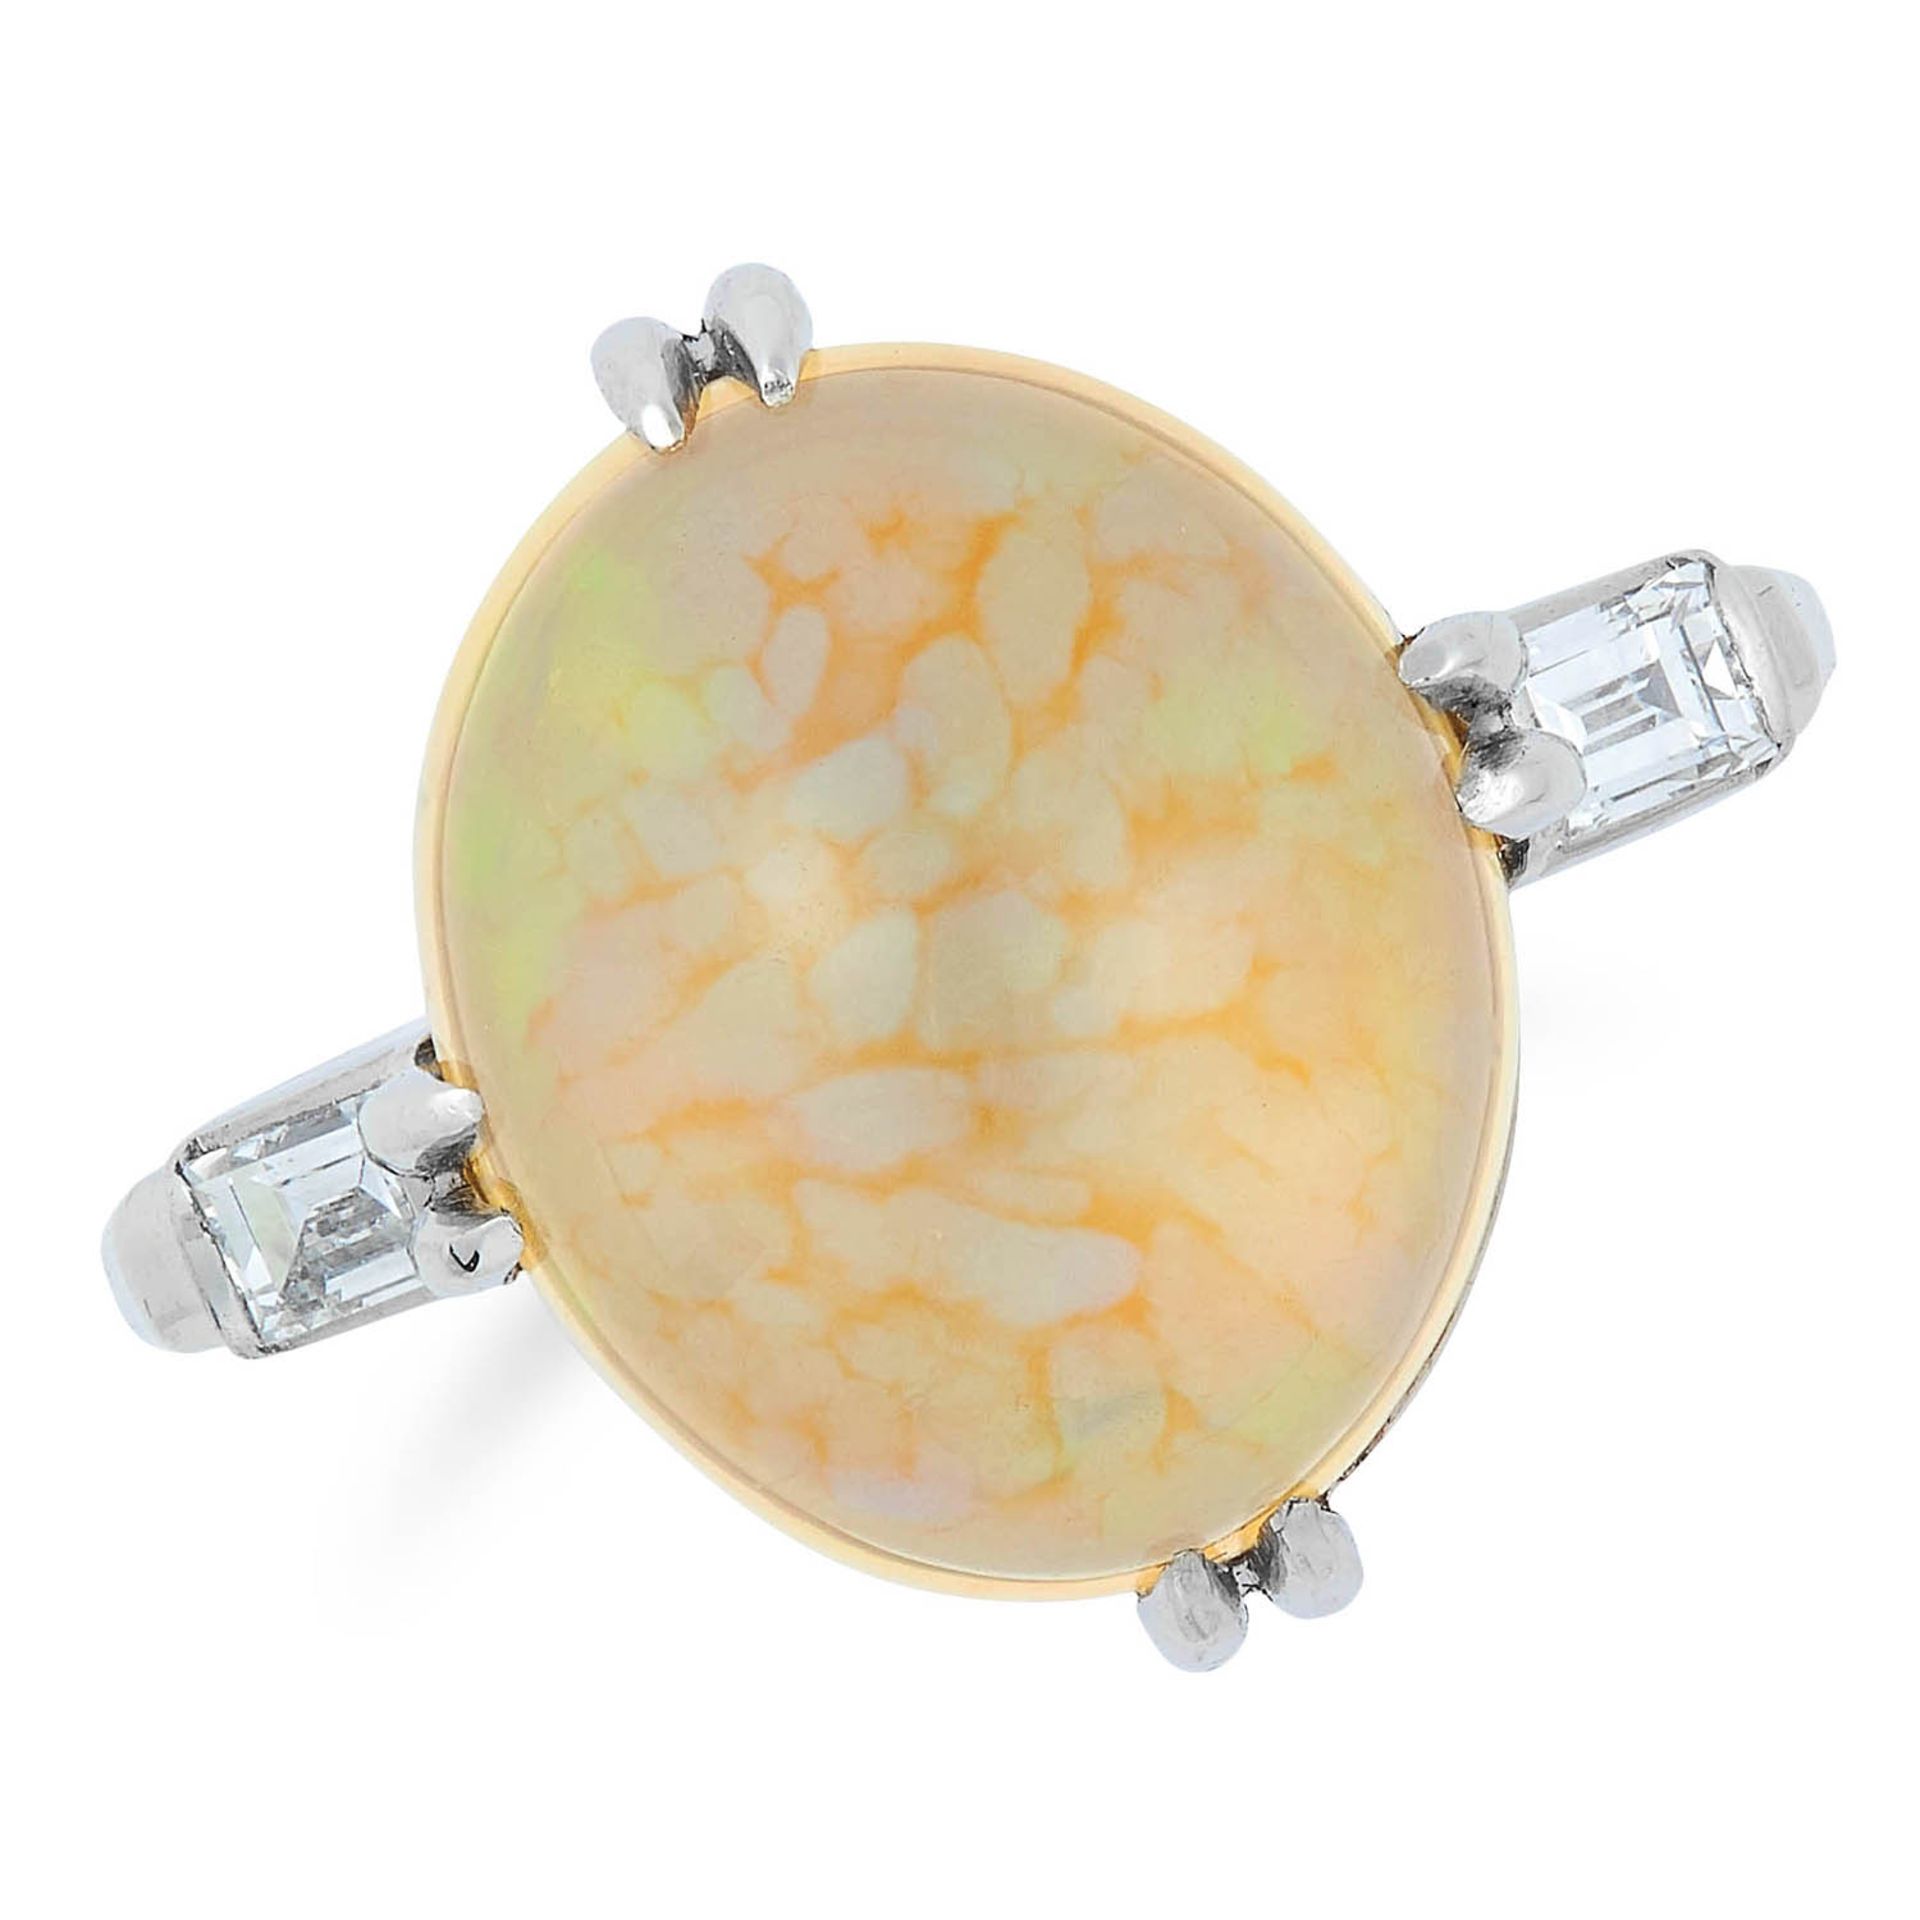 OPAL AND DIAMOND RING set with a cabochon opal between two baguette cut diamonds, size O / 7, 6g.